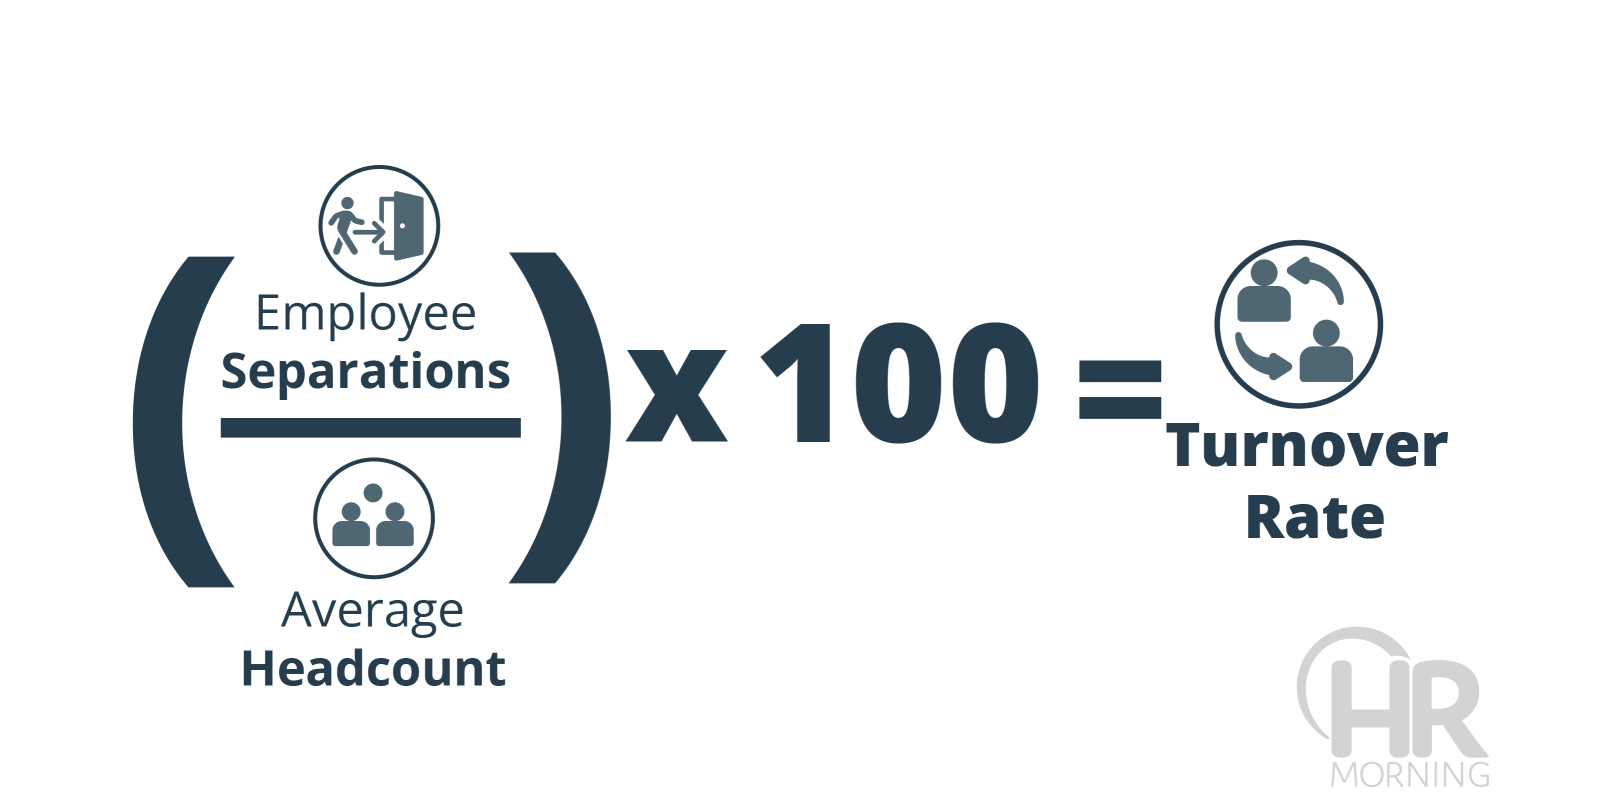 Employee separations divided by average headcount times 100 equals turnover rate